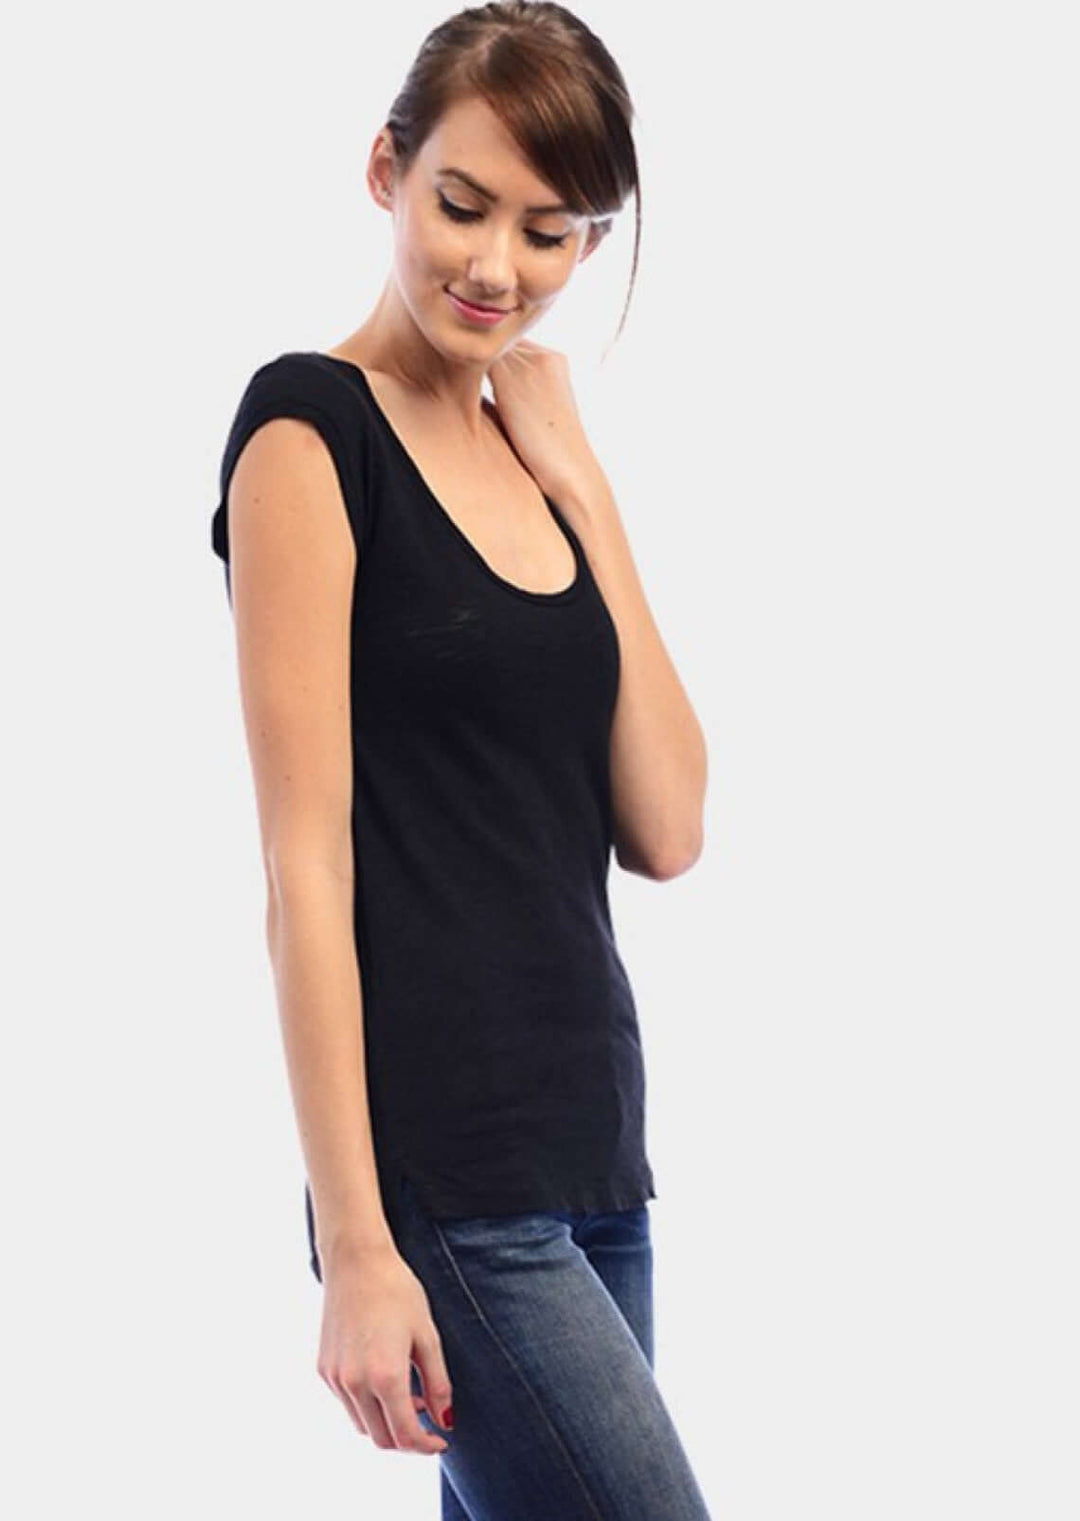 Made in USA Women's Scoop Neck Basic Garment Dyed Cotton Tee T-Shirt with Shirring at Shoulder in Black | Classy Cozy Cool Made in America Boutique